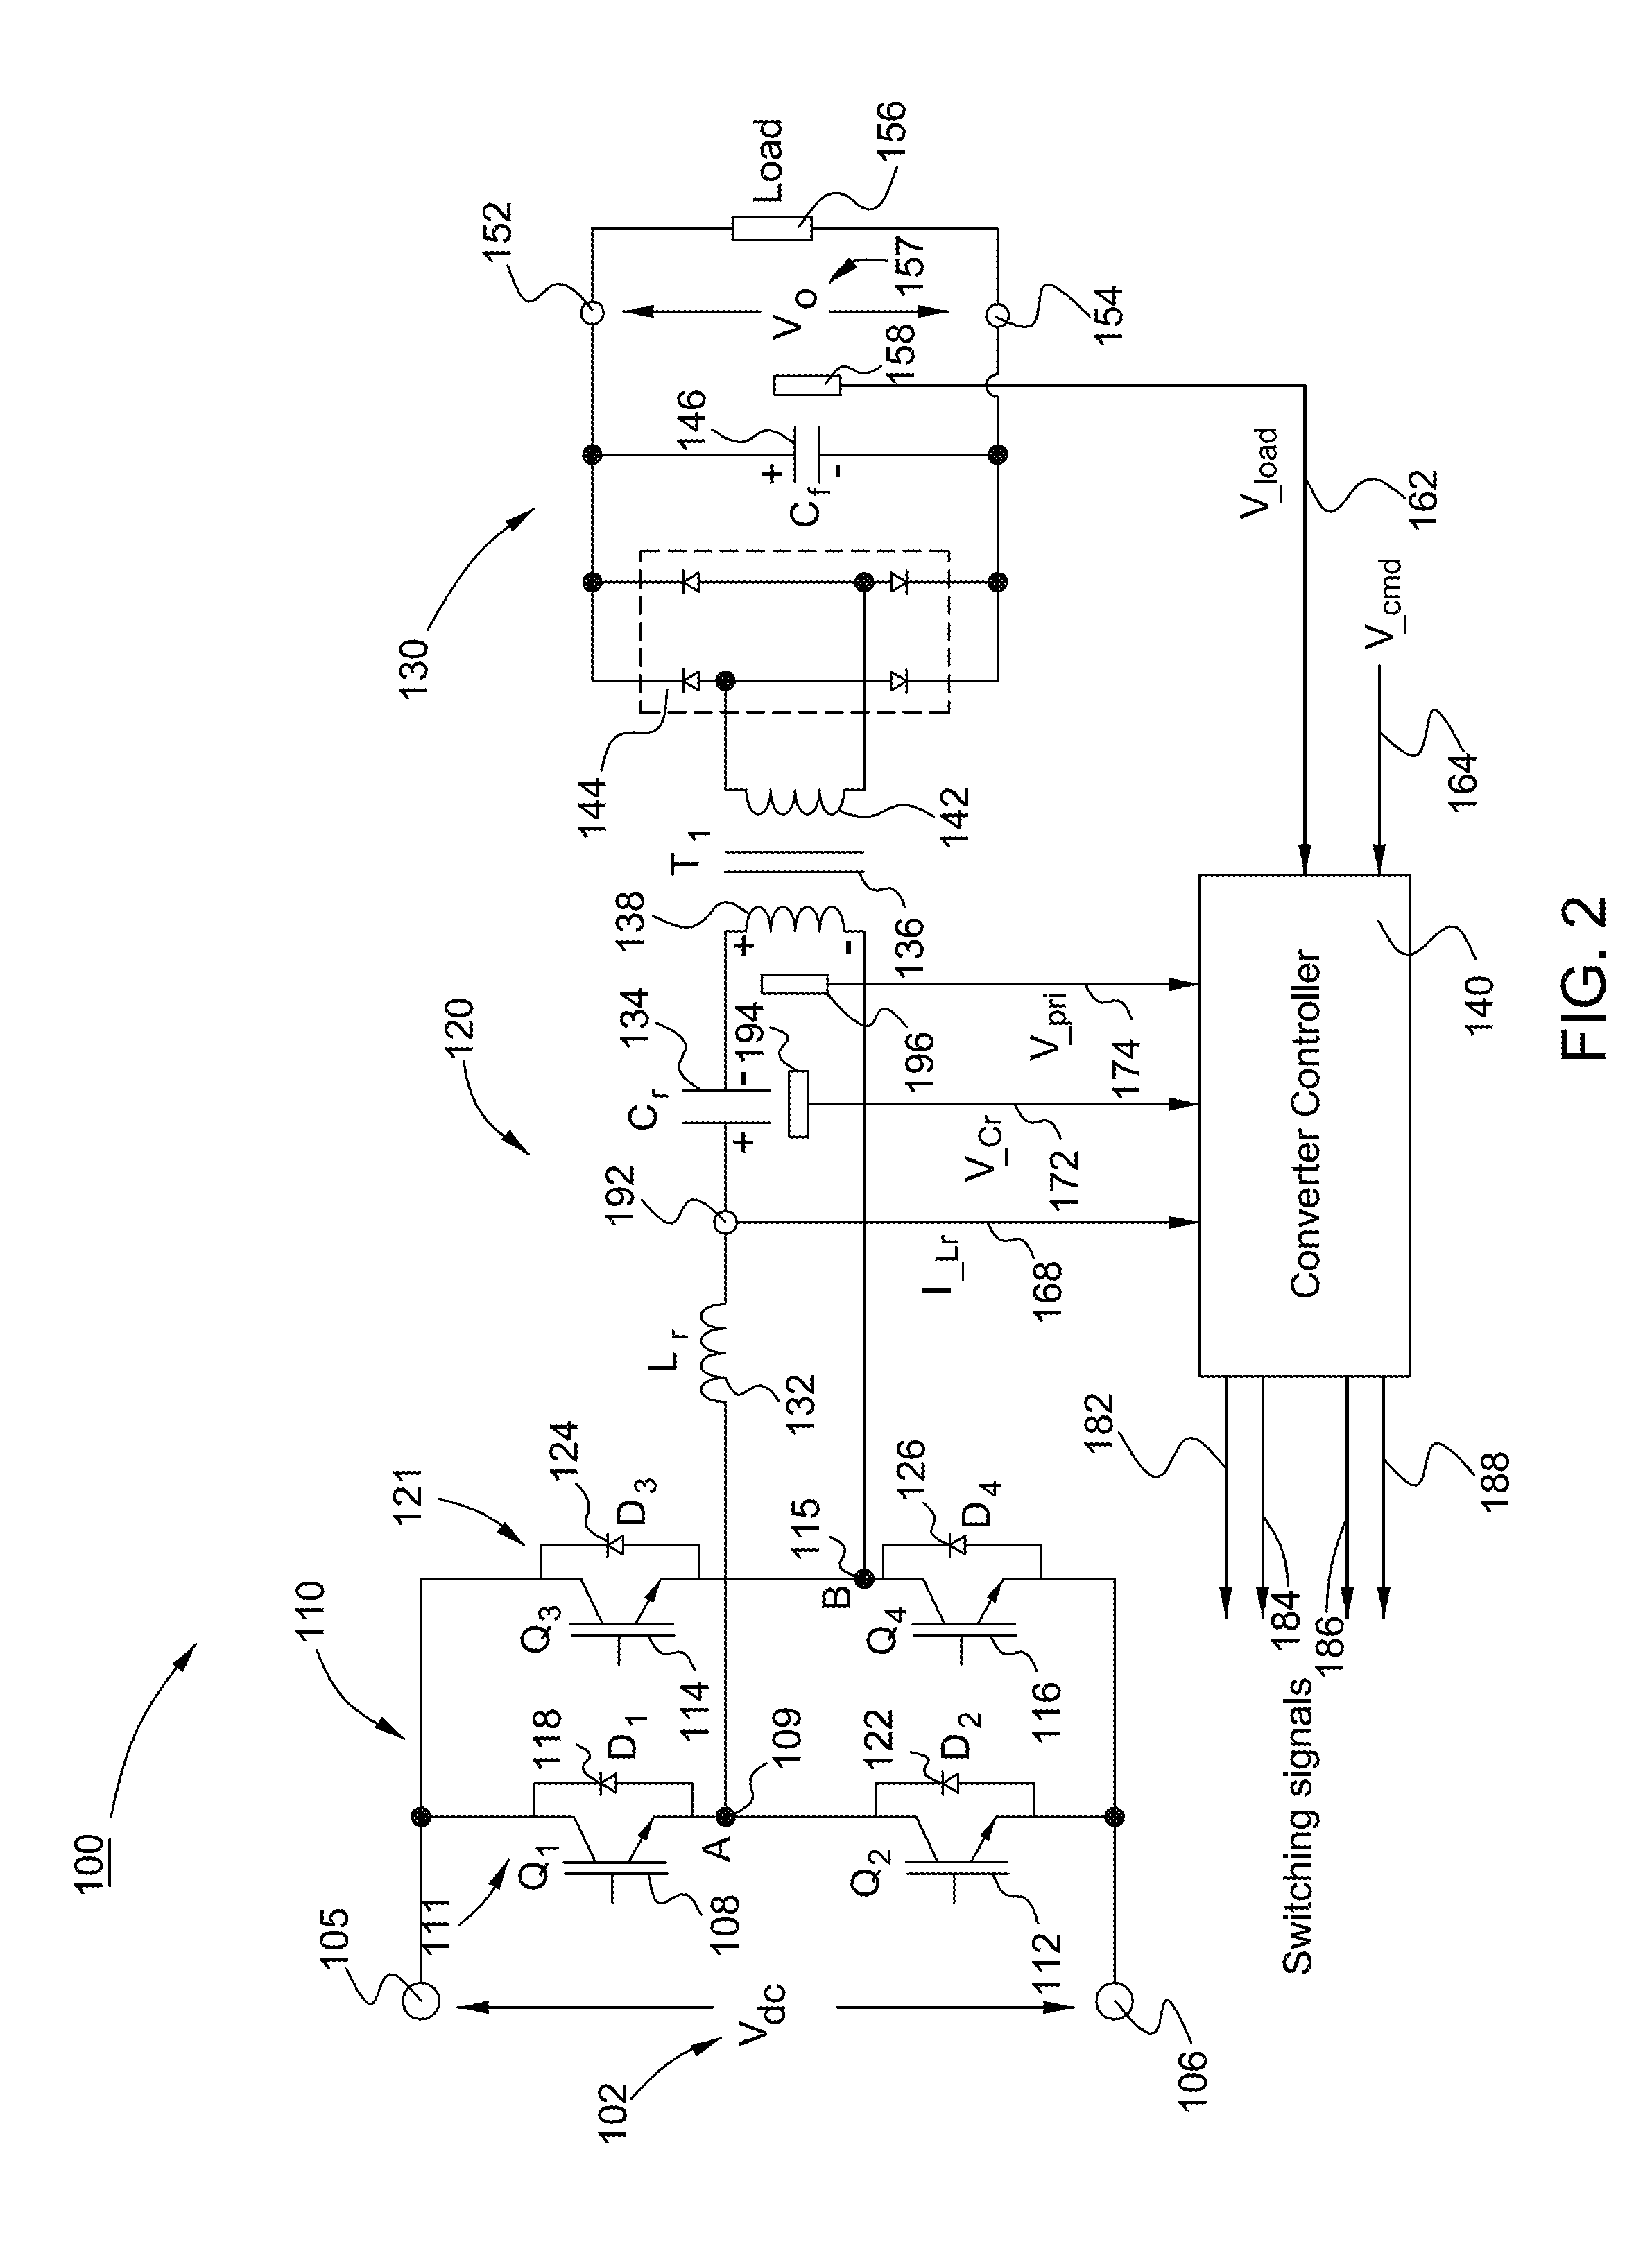 System and method for power supply control